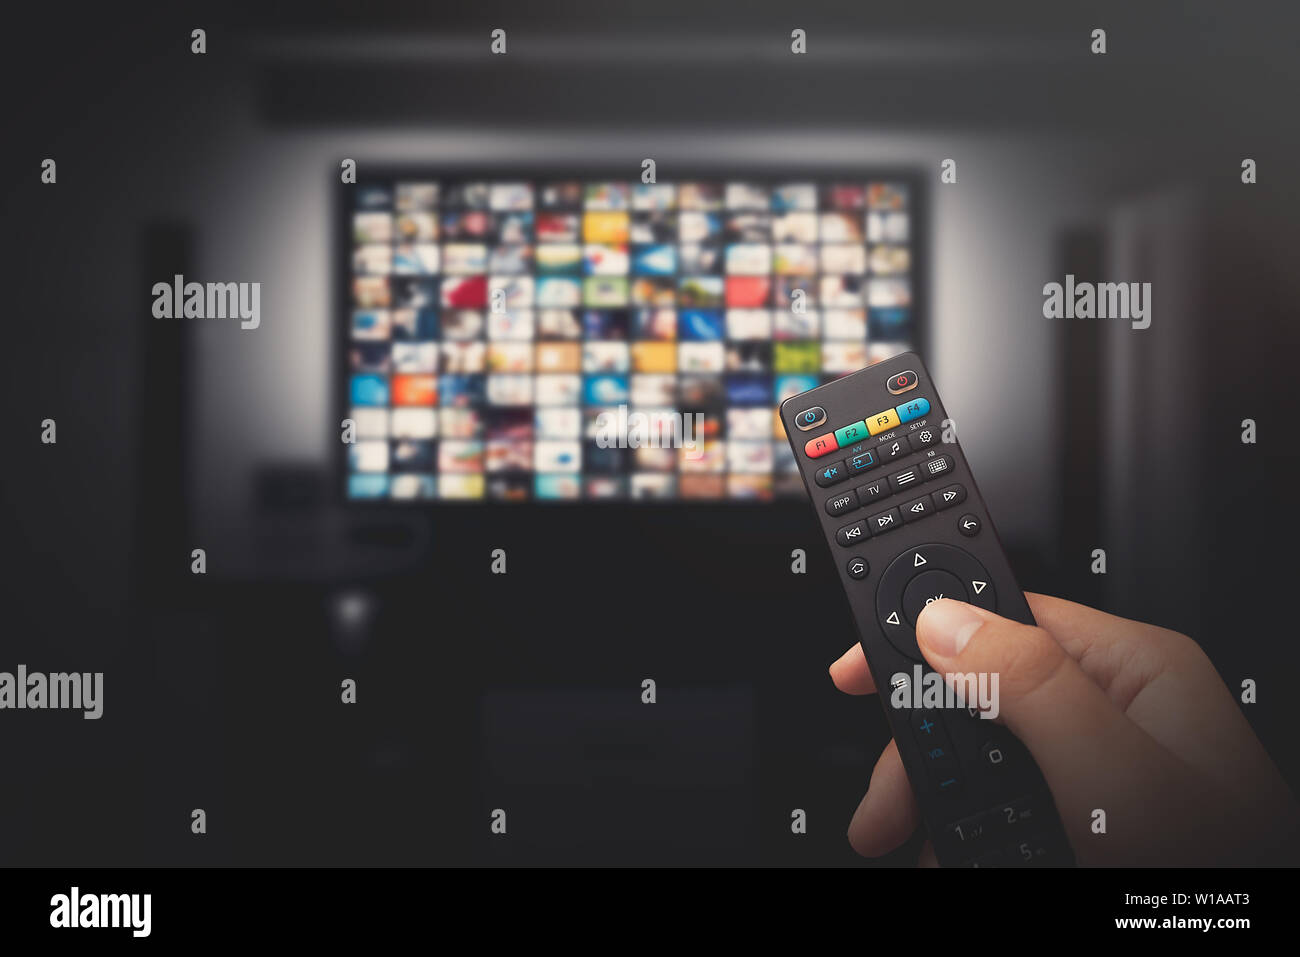 Multimedia video concept on TV set in dark room. Man watching TV with remote control in hand. Stock Photo